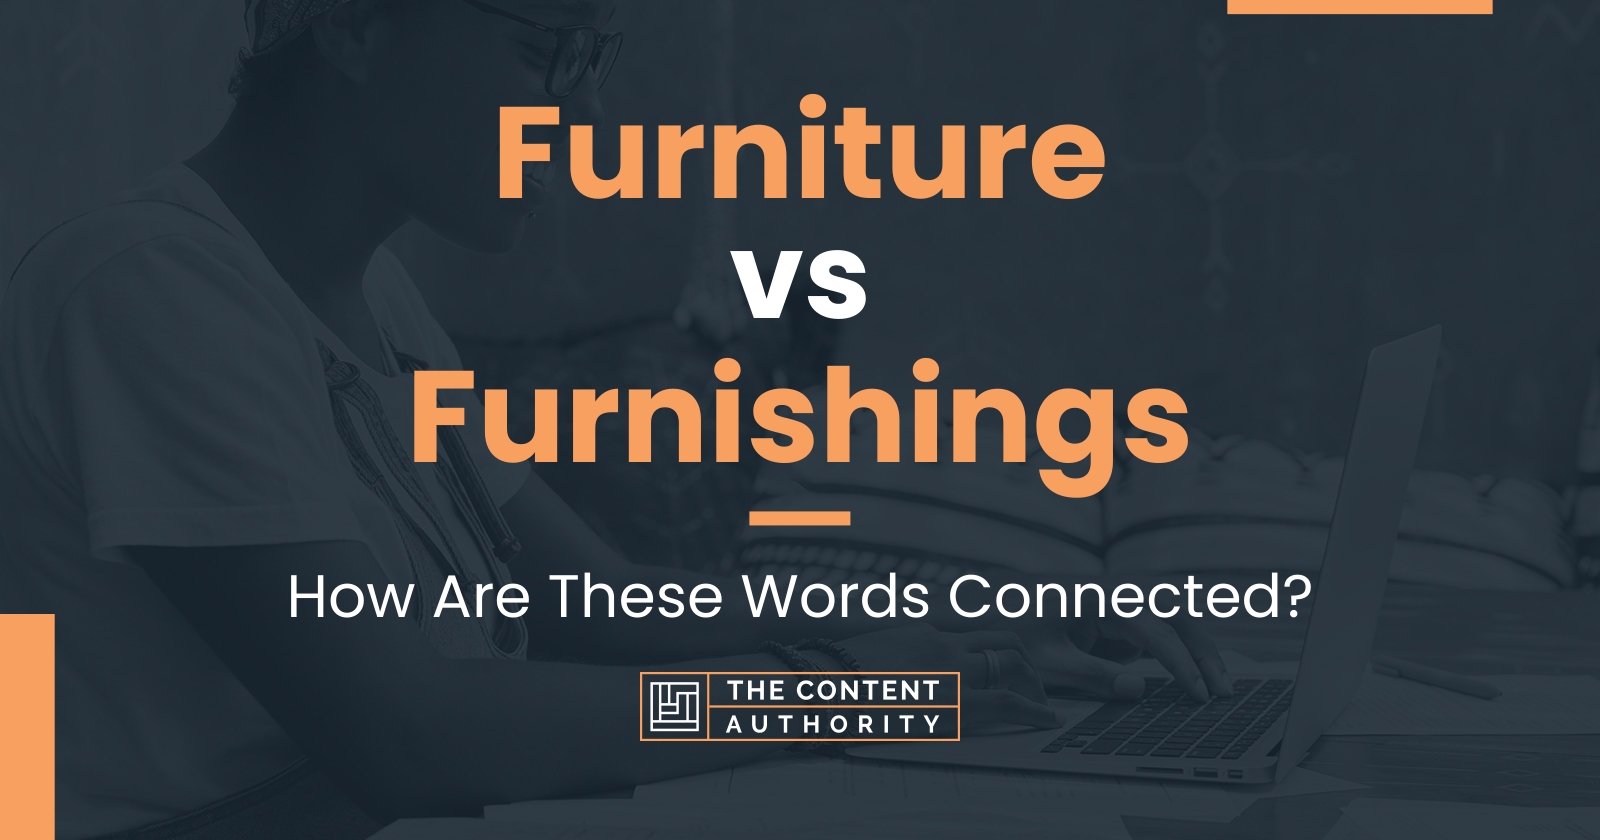 Furniture vs Furnishings: How Are These Words Connected?